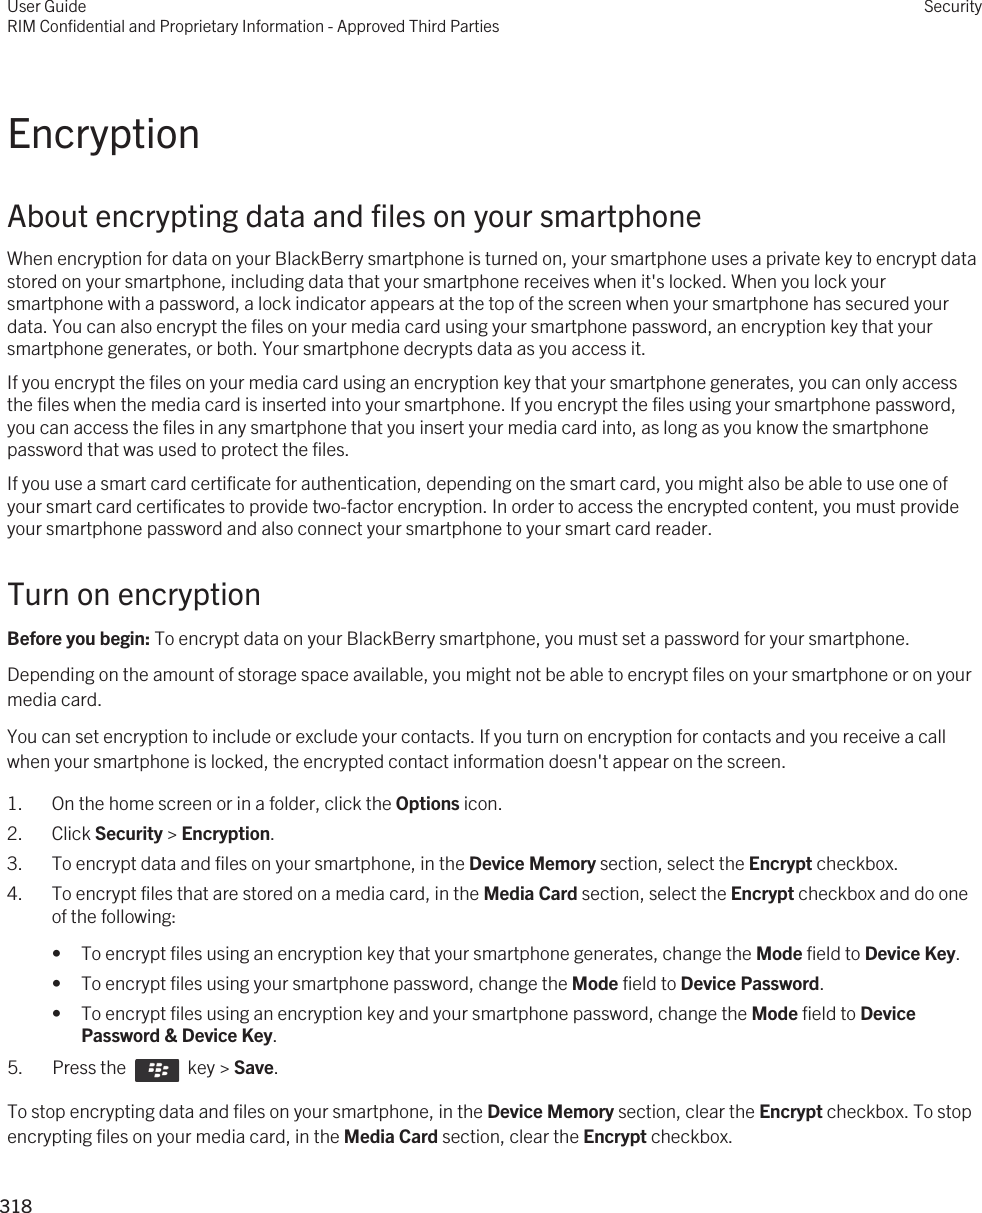 EncryptionAbout encrypting data and files on your smartphoneWhen encryption for data on your BlackBerry smartphone is turned on, your smartphone uses a private key to encrypt data stored on your smartphone, including data that your smartphone receives when it&apos;s locked. When you lock your smartphone with a password, a lock indicator appears at the top of the screen when your smartphone has secured your data. You can also encrypt the files on your media card using your smartphone password, an encryption key that your smartphone generates, or both. Your smartphone decrypts data as you access it.If you encrypt the files on your media card using an encryption key that your smartphone generates, you can only access the files when the media card is inserted into your smartphone. If you encrypt the files using your smartphone password, you can access the files in any smartphone that you insert your media card into, as long as you know the smartphone password that was used to protect the files.If you use a smart card certificate for authentication, depending on the smart card, you might also be able to use one of your smart card certificates to provide two-factor encryption. In order to access the encrypted content, you must provide your smartphone password and also connect your smartphone to your smart card reader.Turn on encryptionBefore you begin: To encrypt data on your BlackBerry smartphone, you must set a password for your smartphone.Depending on the amount of storage space available, you might not be able to encrypt files on your smartphone or on your media card.You can set encryption to include or exclude your contacts. If you turn on encryption for contacts and you receive a call when your smartphone is locked, the encrypted contact information doesn&apos;t appear on the screen.1. On the home screen or in a folder, click the Options icon.2. Click Security &gt; Encryption.3. To encrypt data and files on your smartphone, in the Device Memory section, select the Encrypt checkbox.4. To encrypt files that are stored on a media card, in the Media Card section, select the Encrypt checkbox and do one of the following:• To encrypt files using an encryption key that your smartphone generates, change the Mode field to Device Key.• To encrypt files using your smartphone password, change the Mode field to Device Password.• To encrypt files using an encryption key and your smartphone password, change the Mode field to Device Password &amp; Device Key.5.  Press the    key &gt; Save. To stop encrypting data and files on your smartphone, in the Device Memory section, clear the Encrypt checkbox. To stop encrypting files on your media card, in the Media Card section, clear the Encrypt checkbox.User GuideRIM Confidential and Proprietary Information - Approved Third PartiesSecurity318 